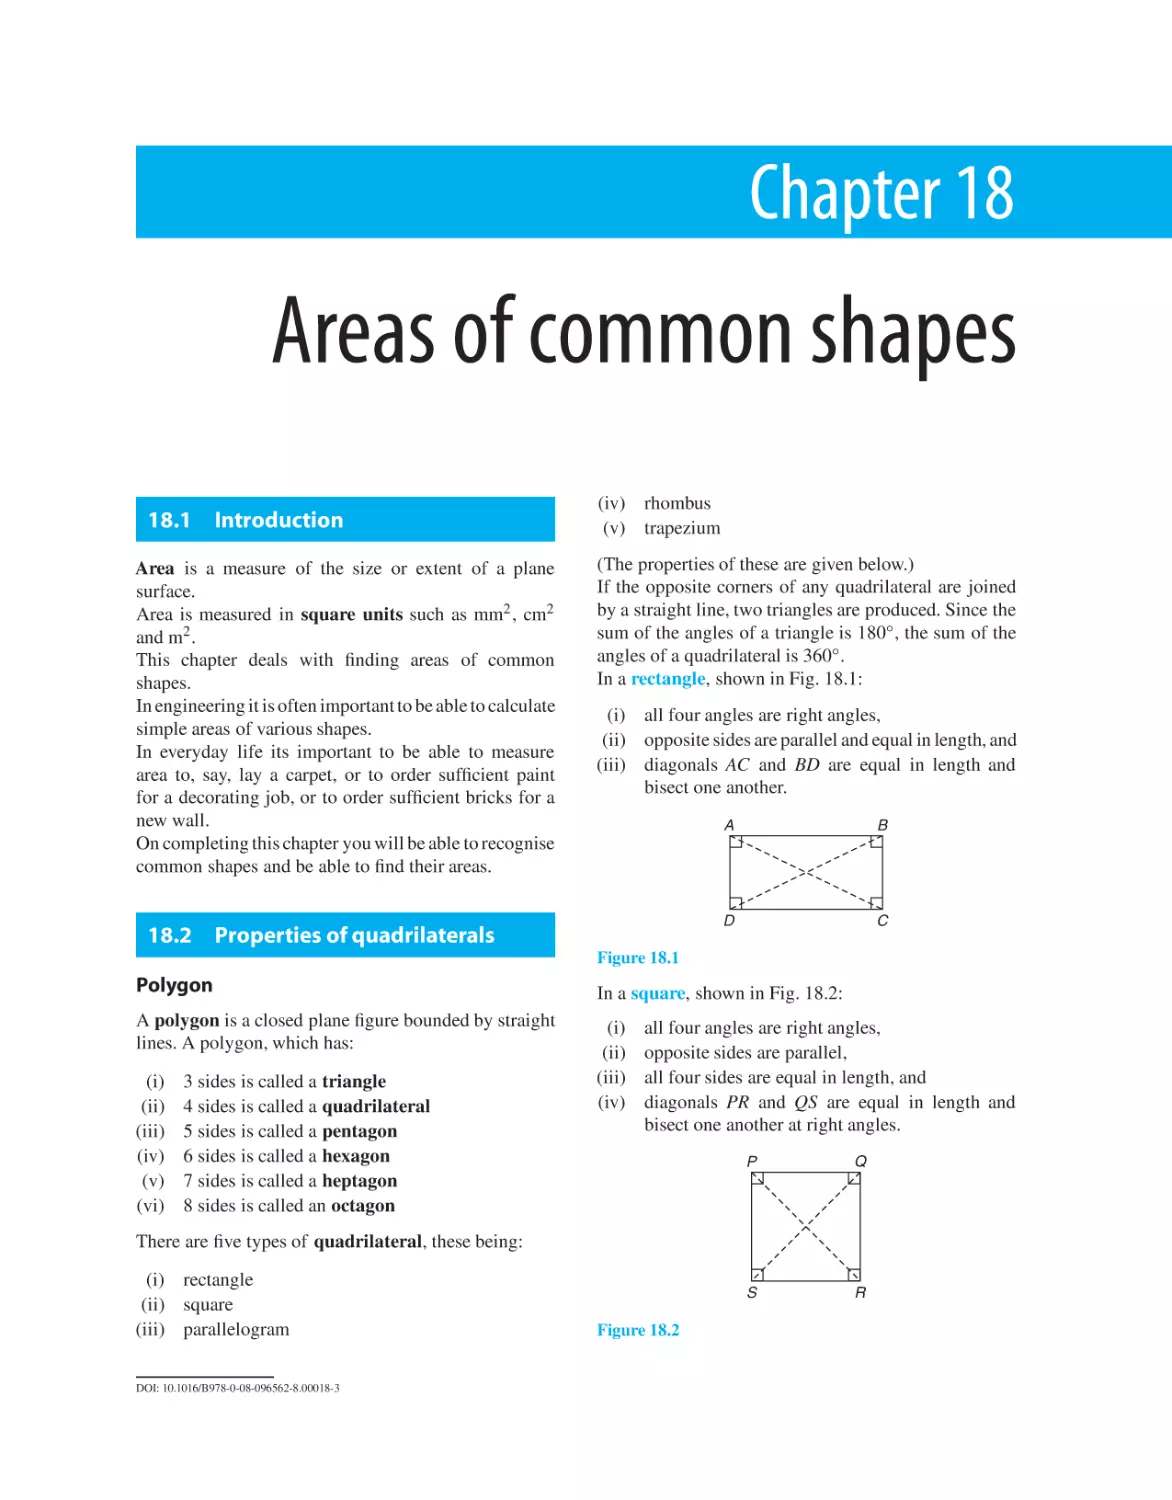 Chapter 18. Areas of common shapes
18.1 Introduction
18.2 Properties of quadrilaterals